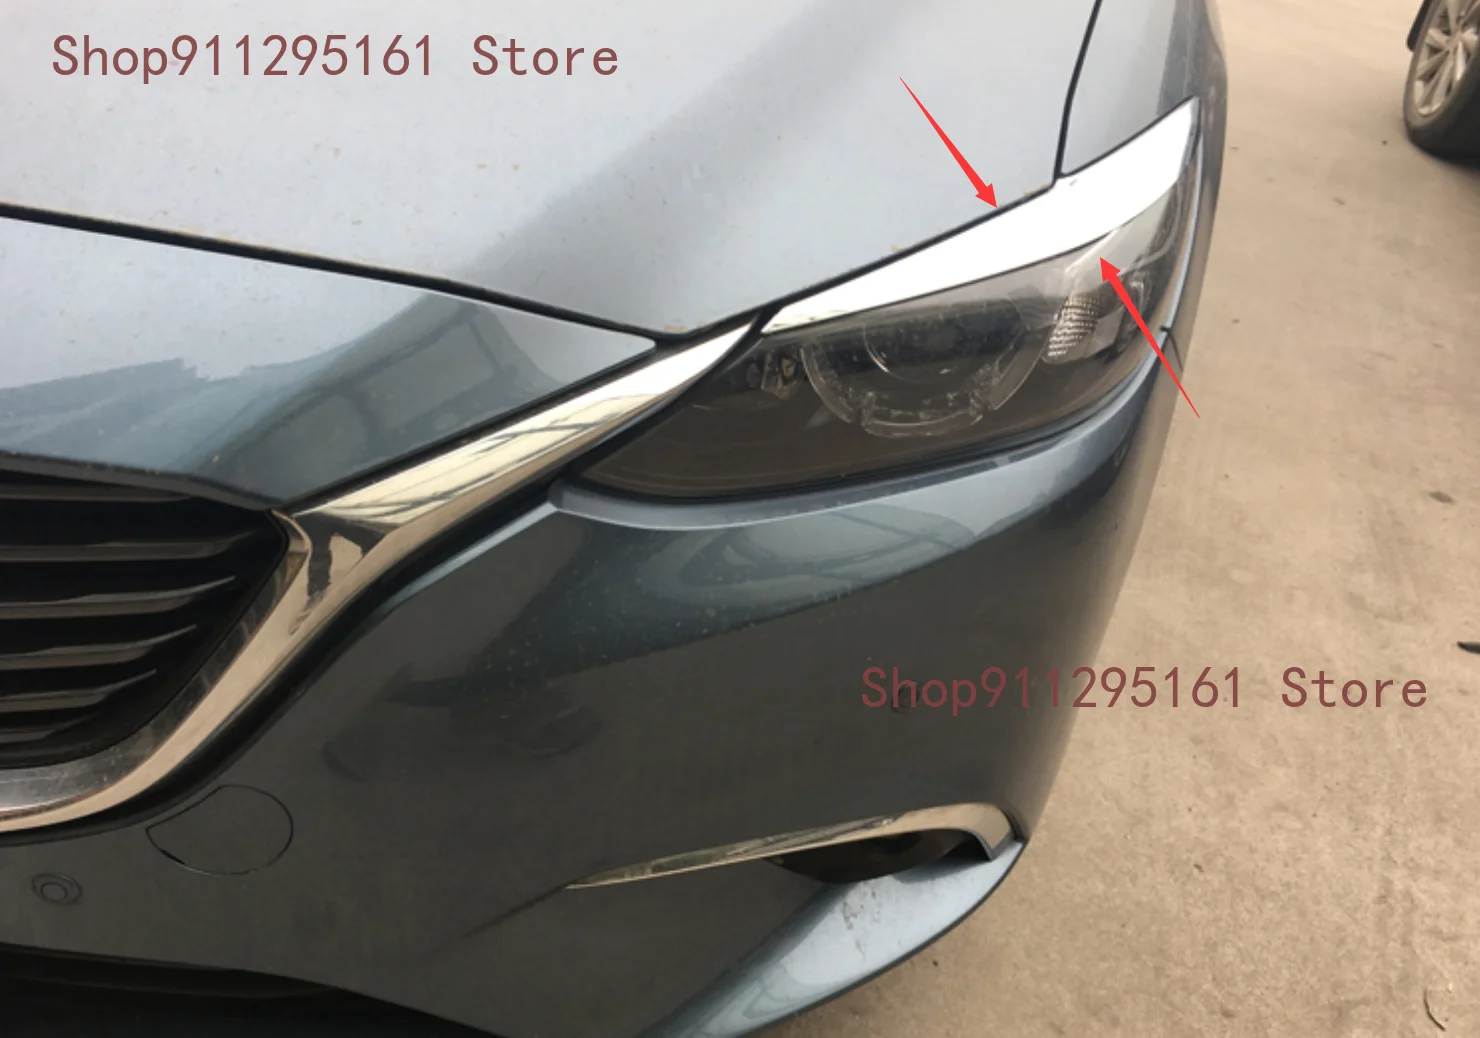 

For Mazda 6 M6 Atenza 2016 2017 Exterior Decals Strips Parts Car styling ABS Headlight Eyebrow Decorative Cover Sticker Trim